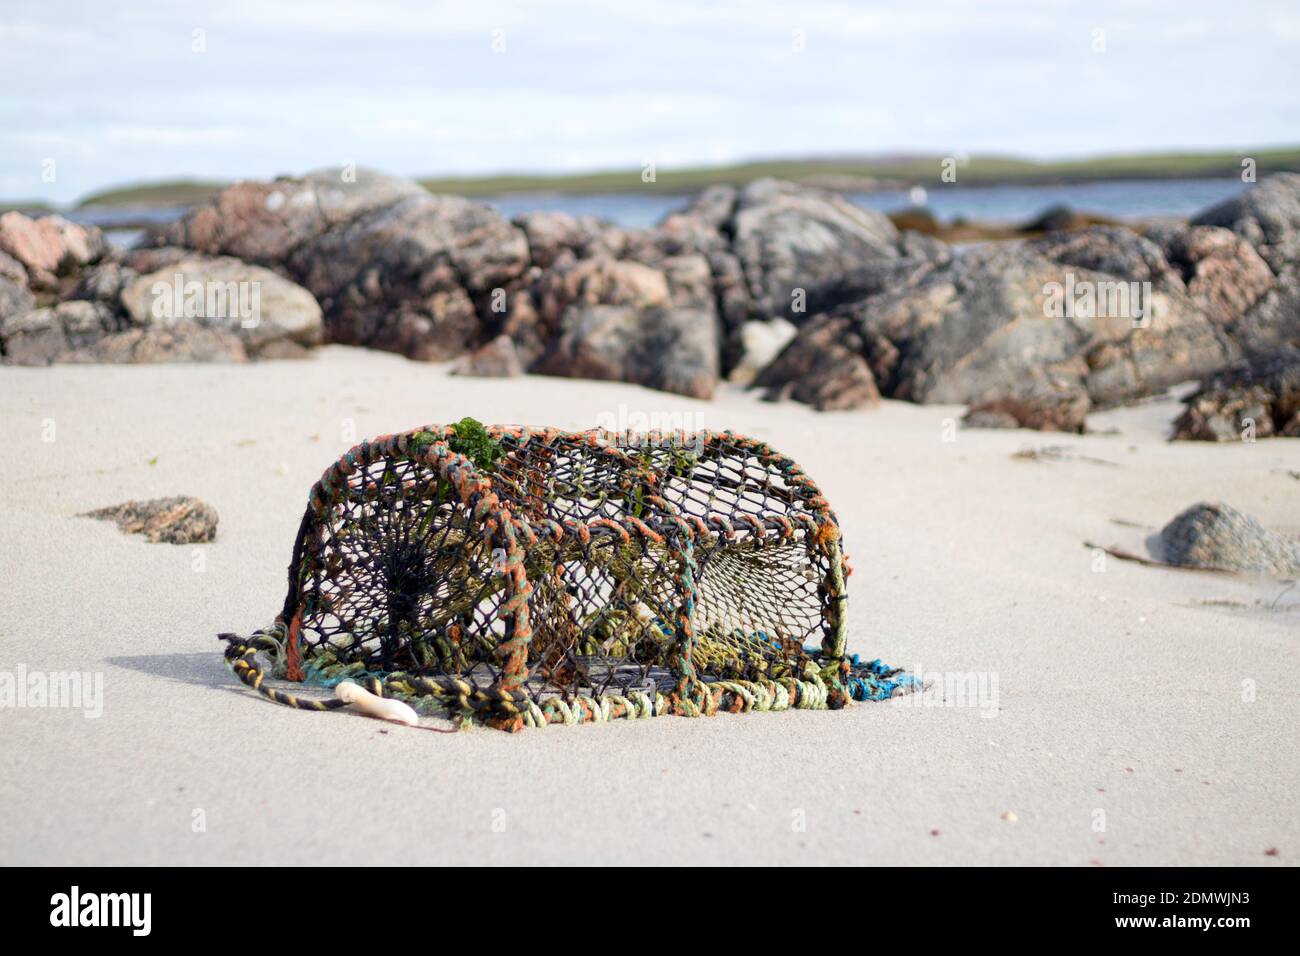 Lobster pot washed up on Scottish beach Stock Photo